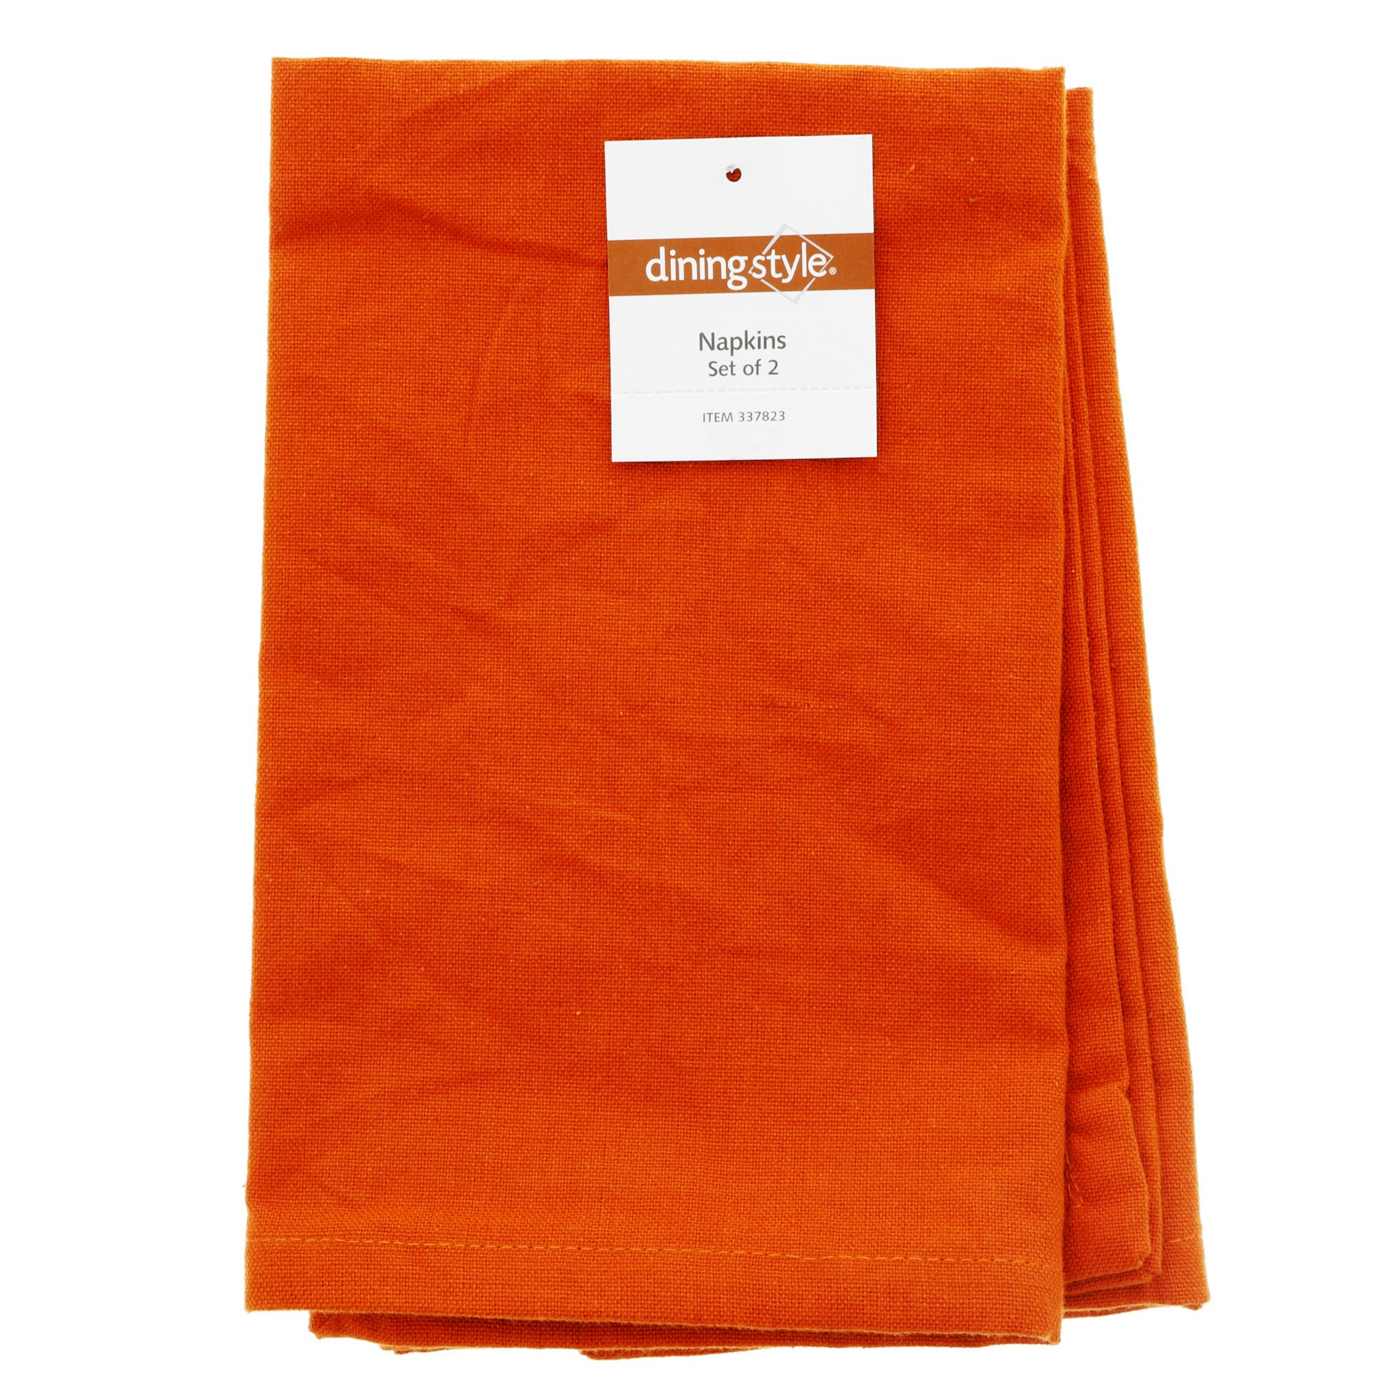 Dining Style Fall Napkin Sets, Assorted Colors; image 1 of 3